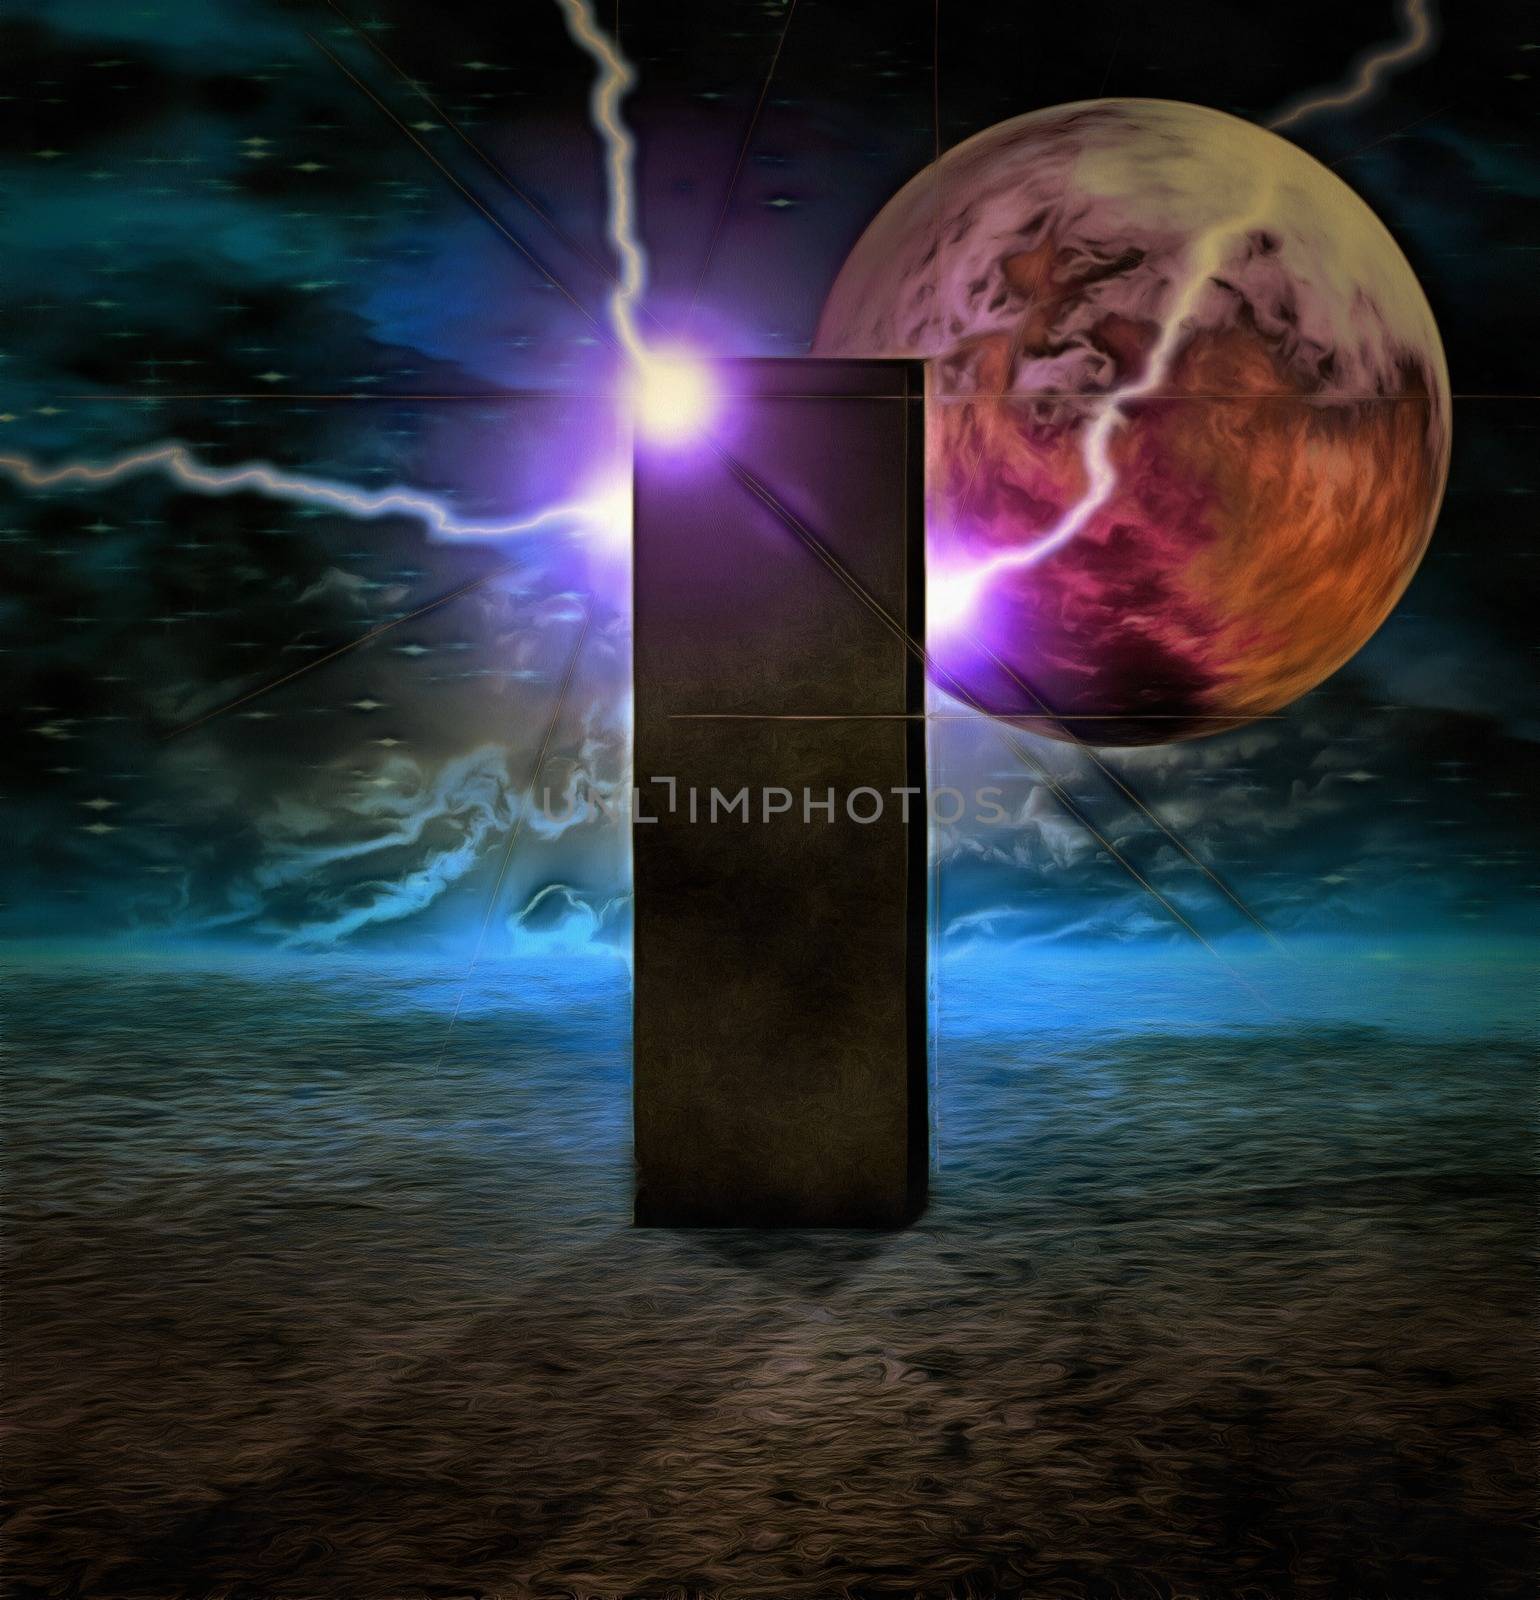 Black monolith on the Moon by applesstock